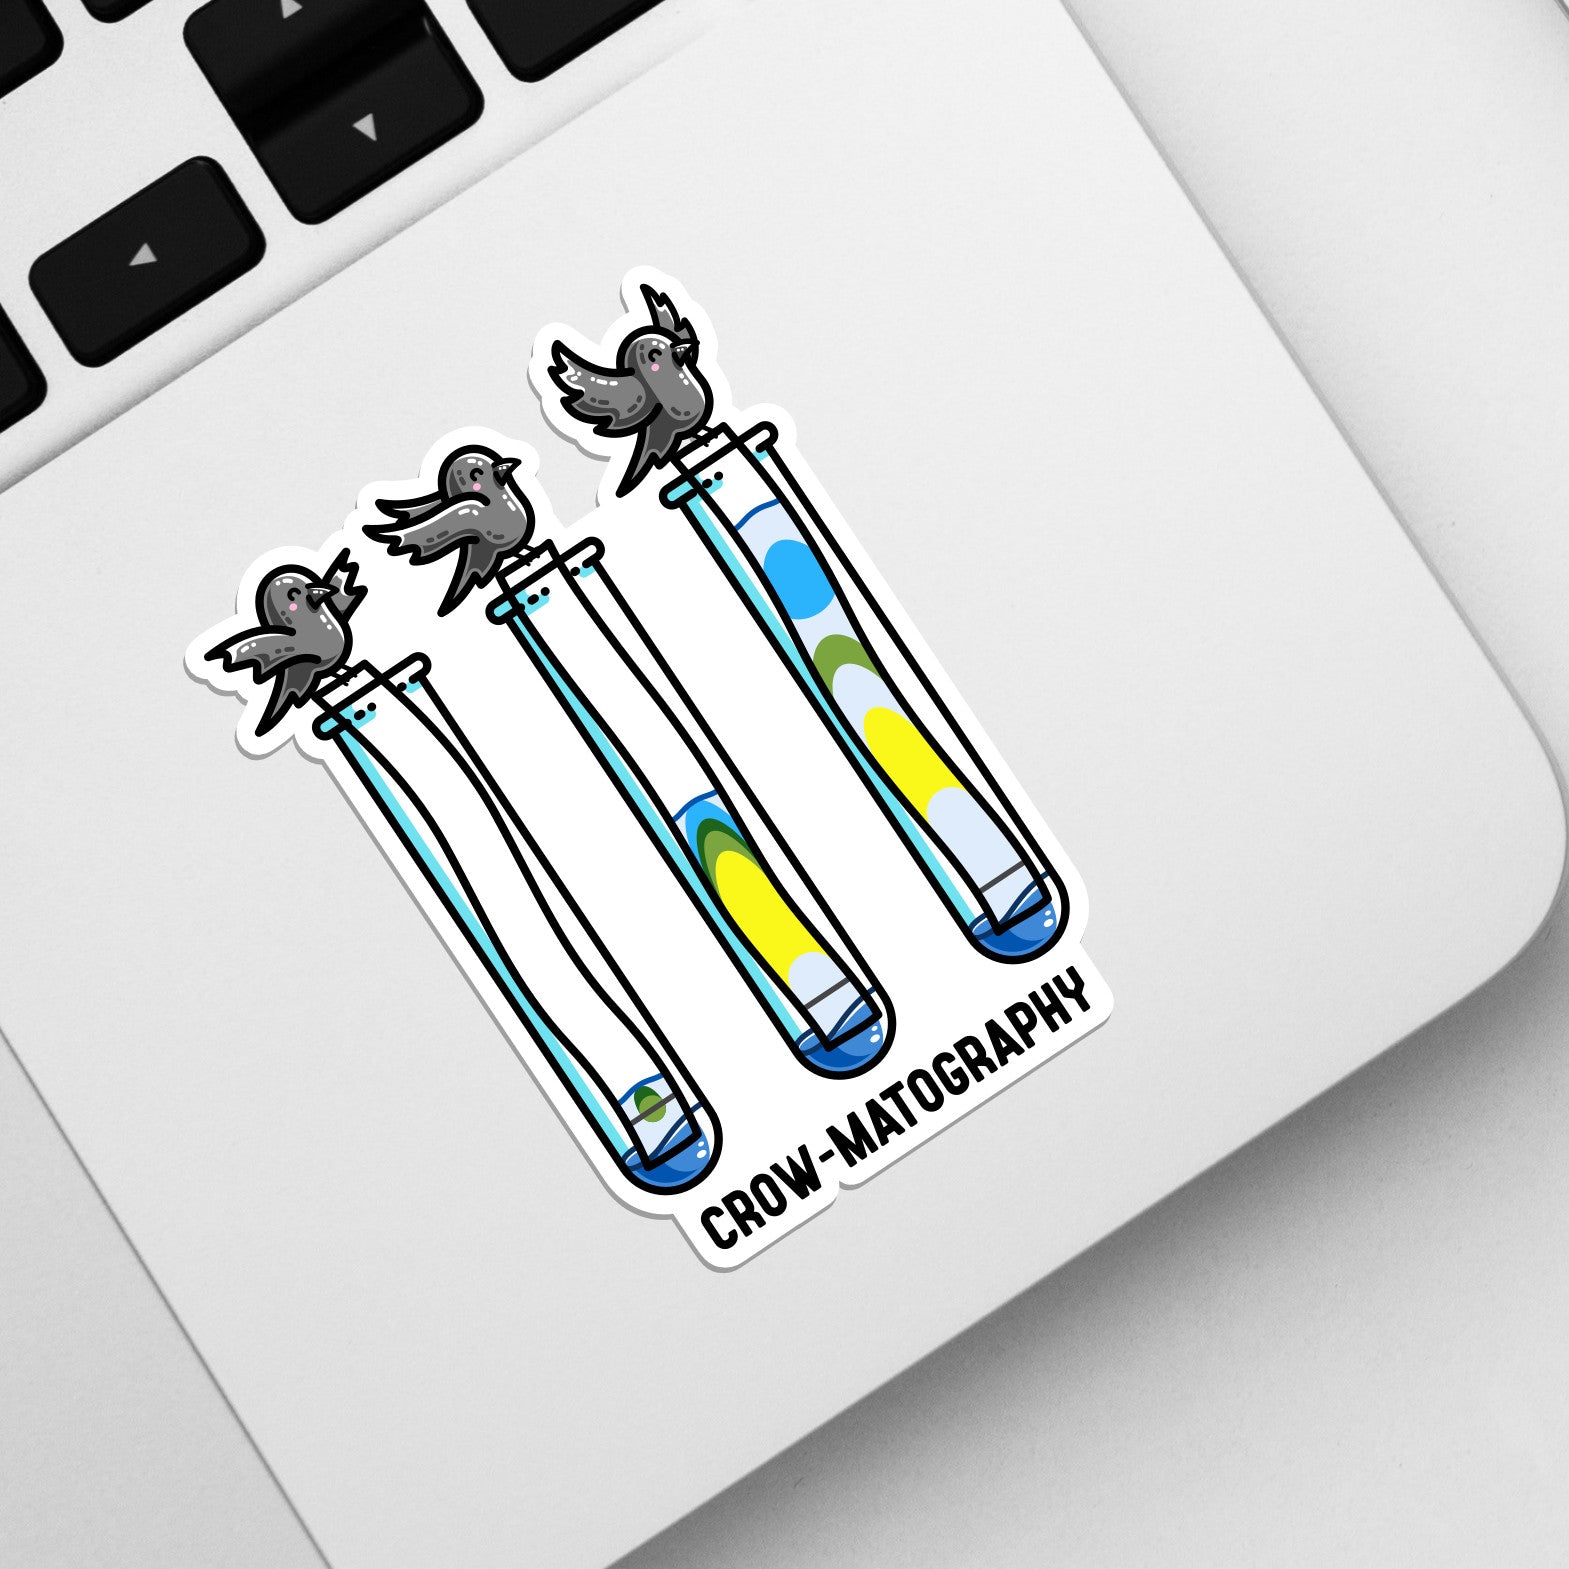 The corner of a laptop keyboard with a die cut vinyl sticker on it. The sticker is of 3 crows holding strips of paper into 3 test tubes showing colour separation, and the pun word crow-matography..